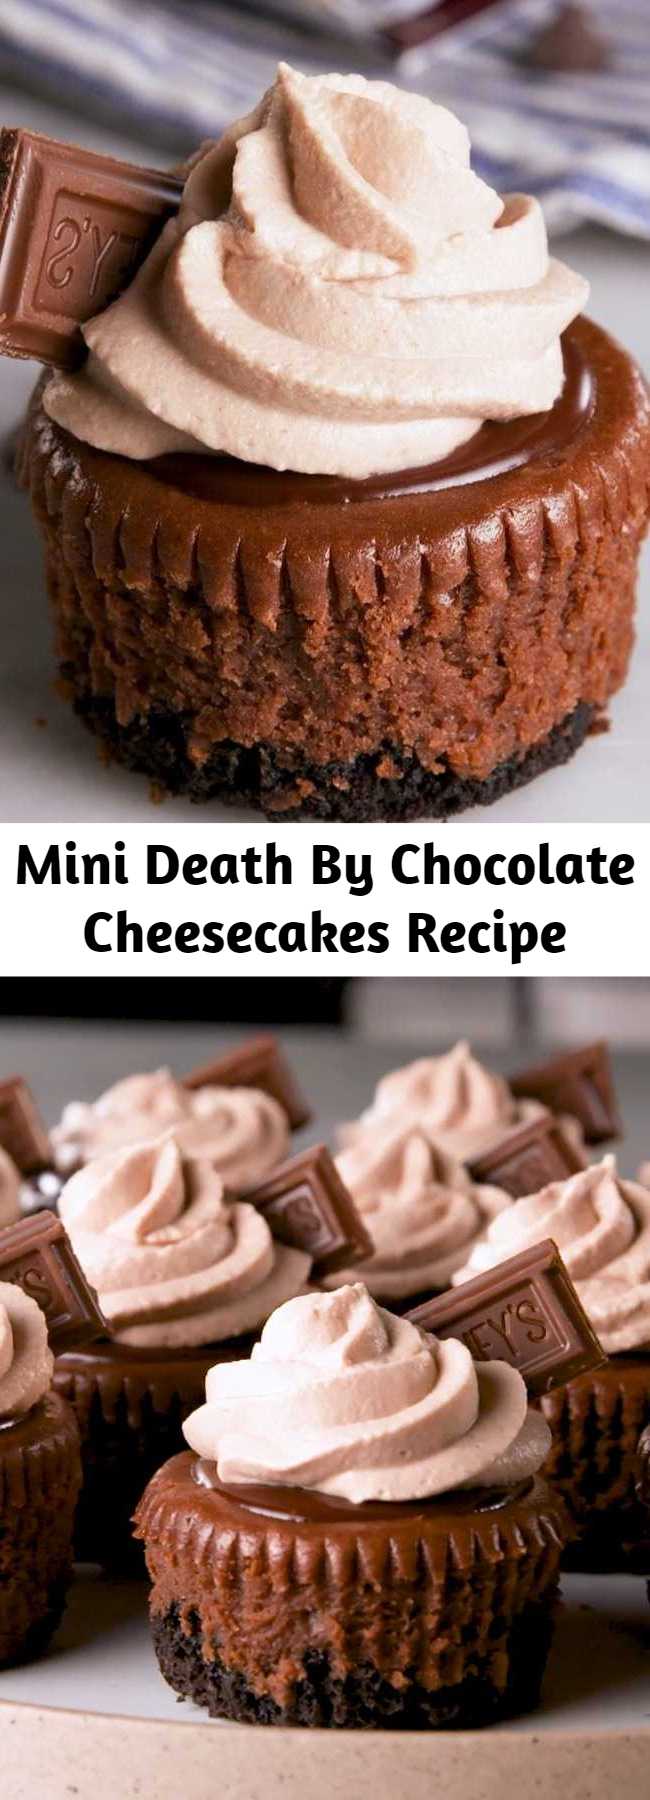 Mini Death By Chocolate Cheesecakes Recipe - Mini cheesecakes are the best way to get a party started...or rather, the best way to end one. Either way, death by chocolate is always the best of the best. These cupcakes are rich and creamy, and chocolate is involved from top to bottom. They're the perfect indulgence. #easy #recipe #mini #deathbychocolate #chocolate #cheesecake #ganache #creamcheese #baked #oreos